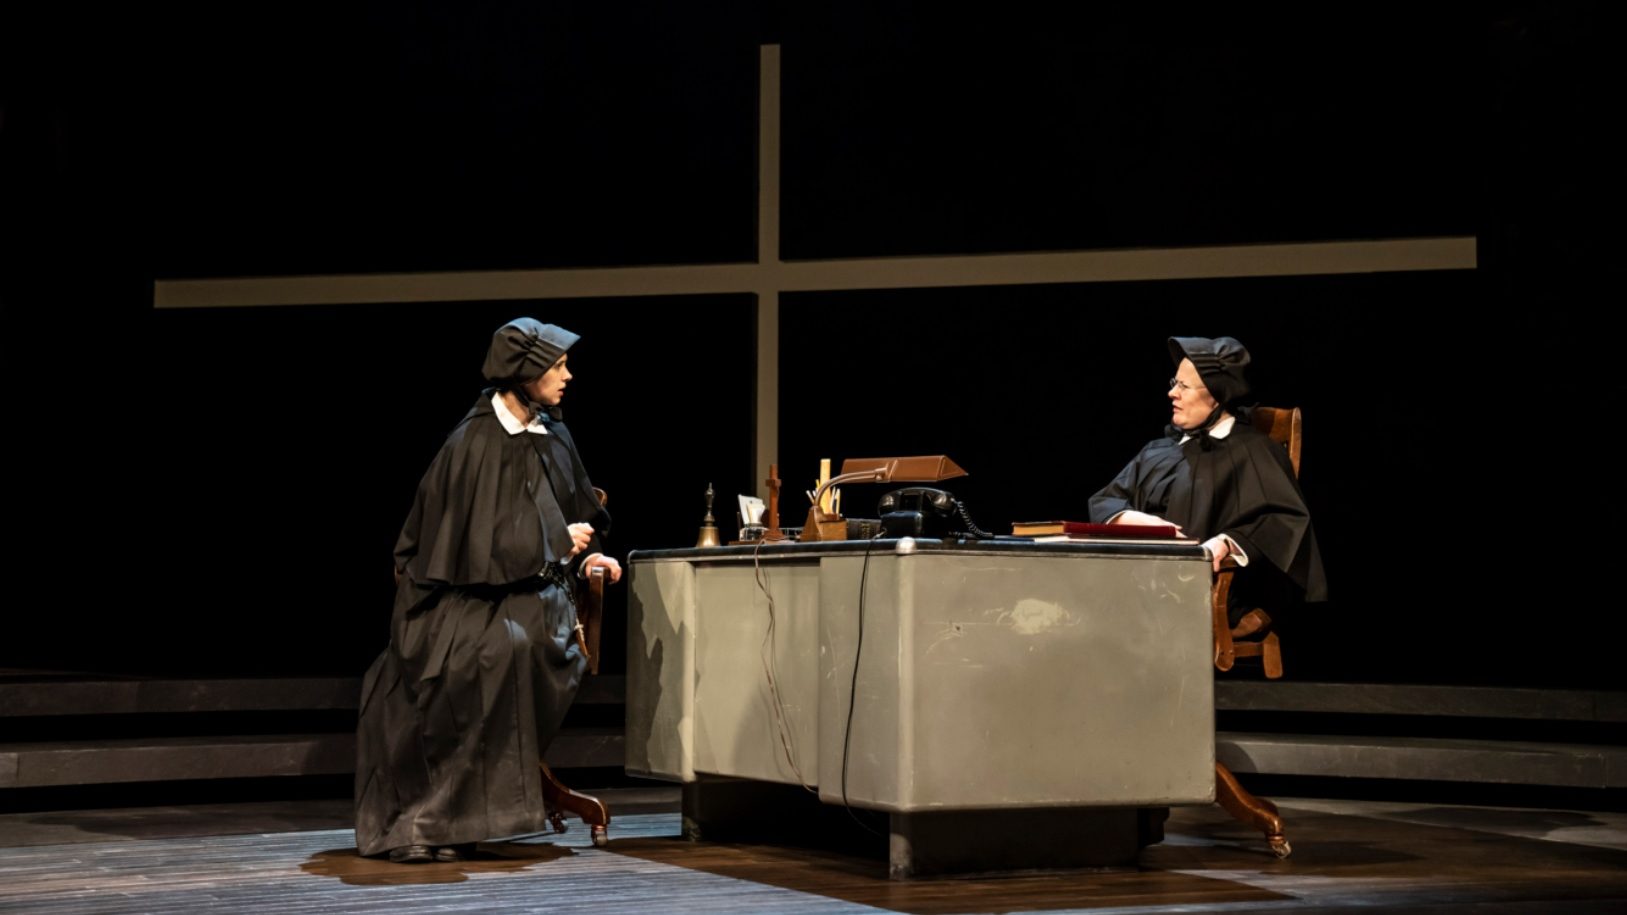 Jessica Rhodes (Sister James) and Monica Dolan (Sister Aloysius) In Doubt At Chichester Festival Theatre. Photo: Johan Persson